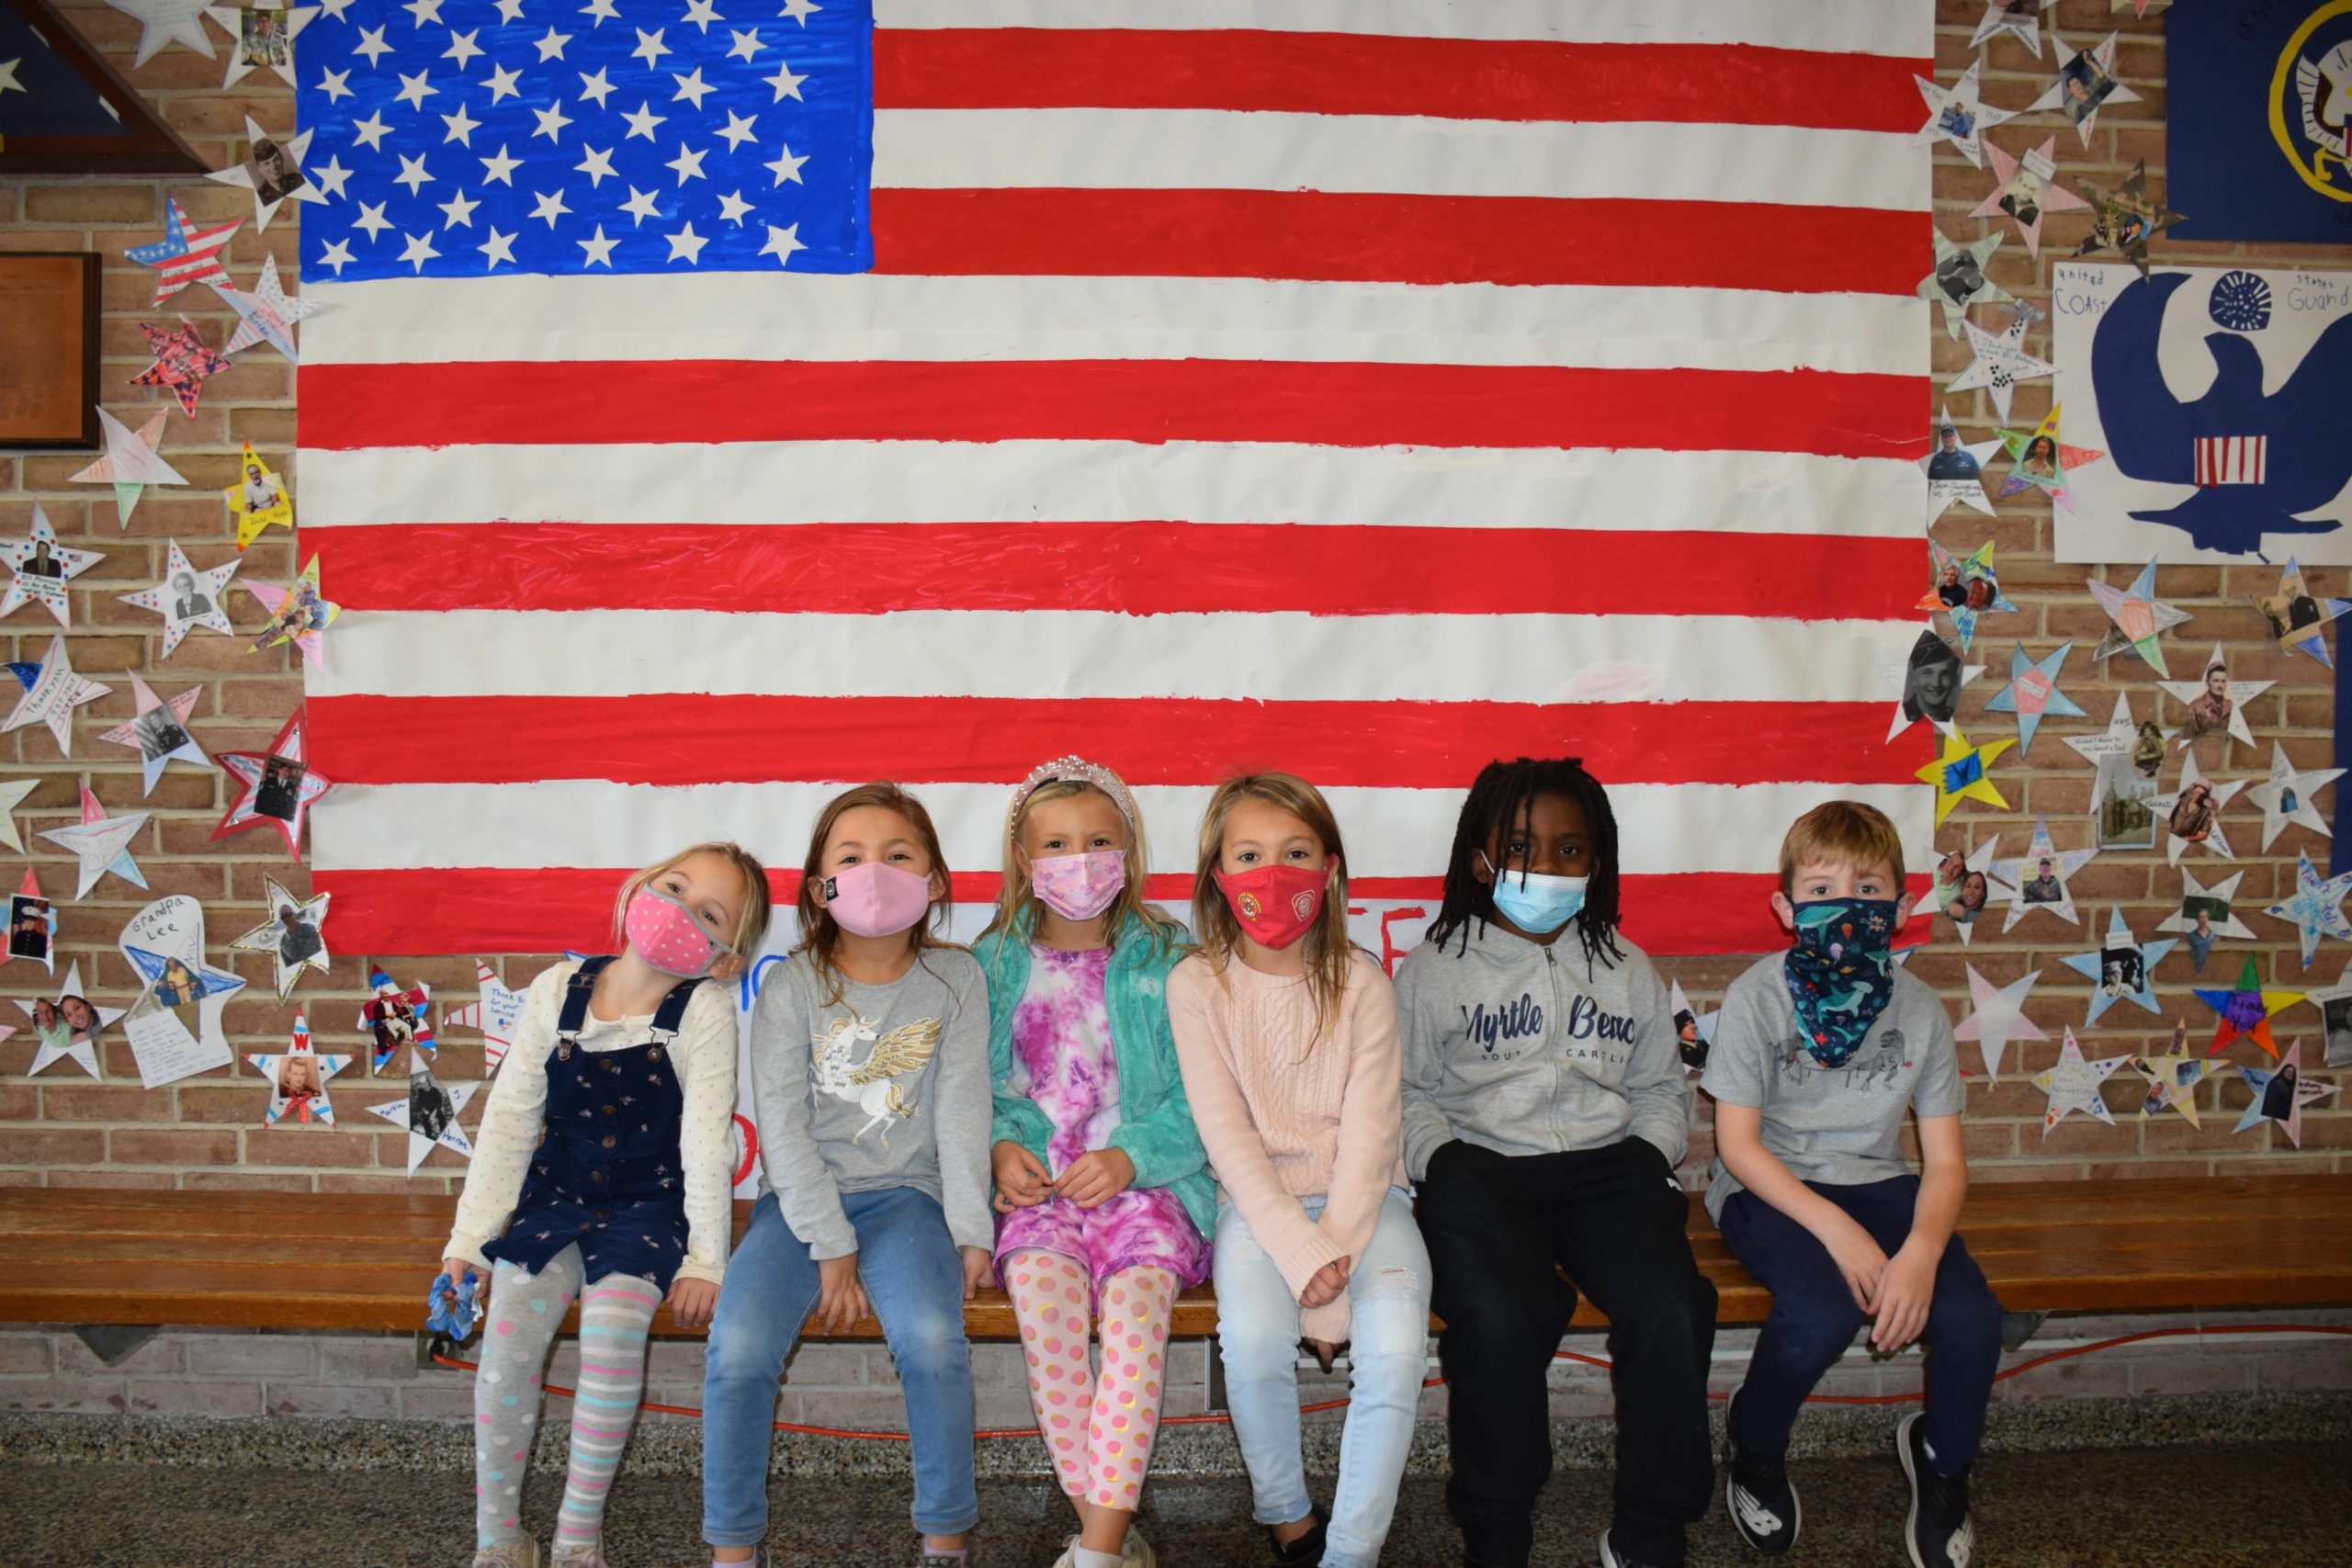 As part of a Veterans Day lesson, first grade students at Westhampton Beach Elementary School created a Hall of Heroes in the main vestibule of their school. They made colorful signs, noting the five branches of the military, and a giant paper American flag. All students in the school were then invited to contribute to the project by gluing photos of family members and friends who are veterans to paper stars that are displayed on the wall.